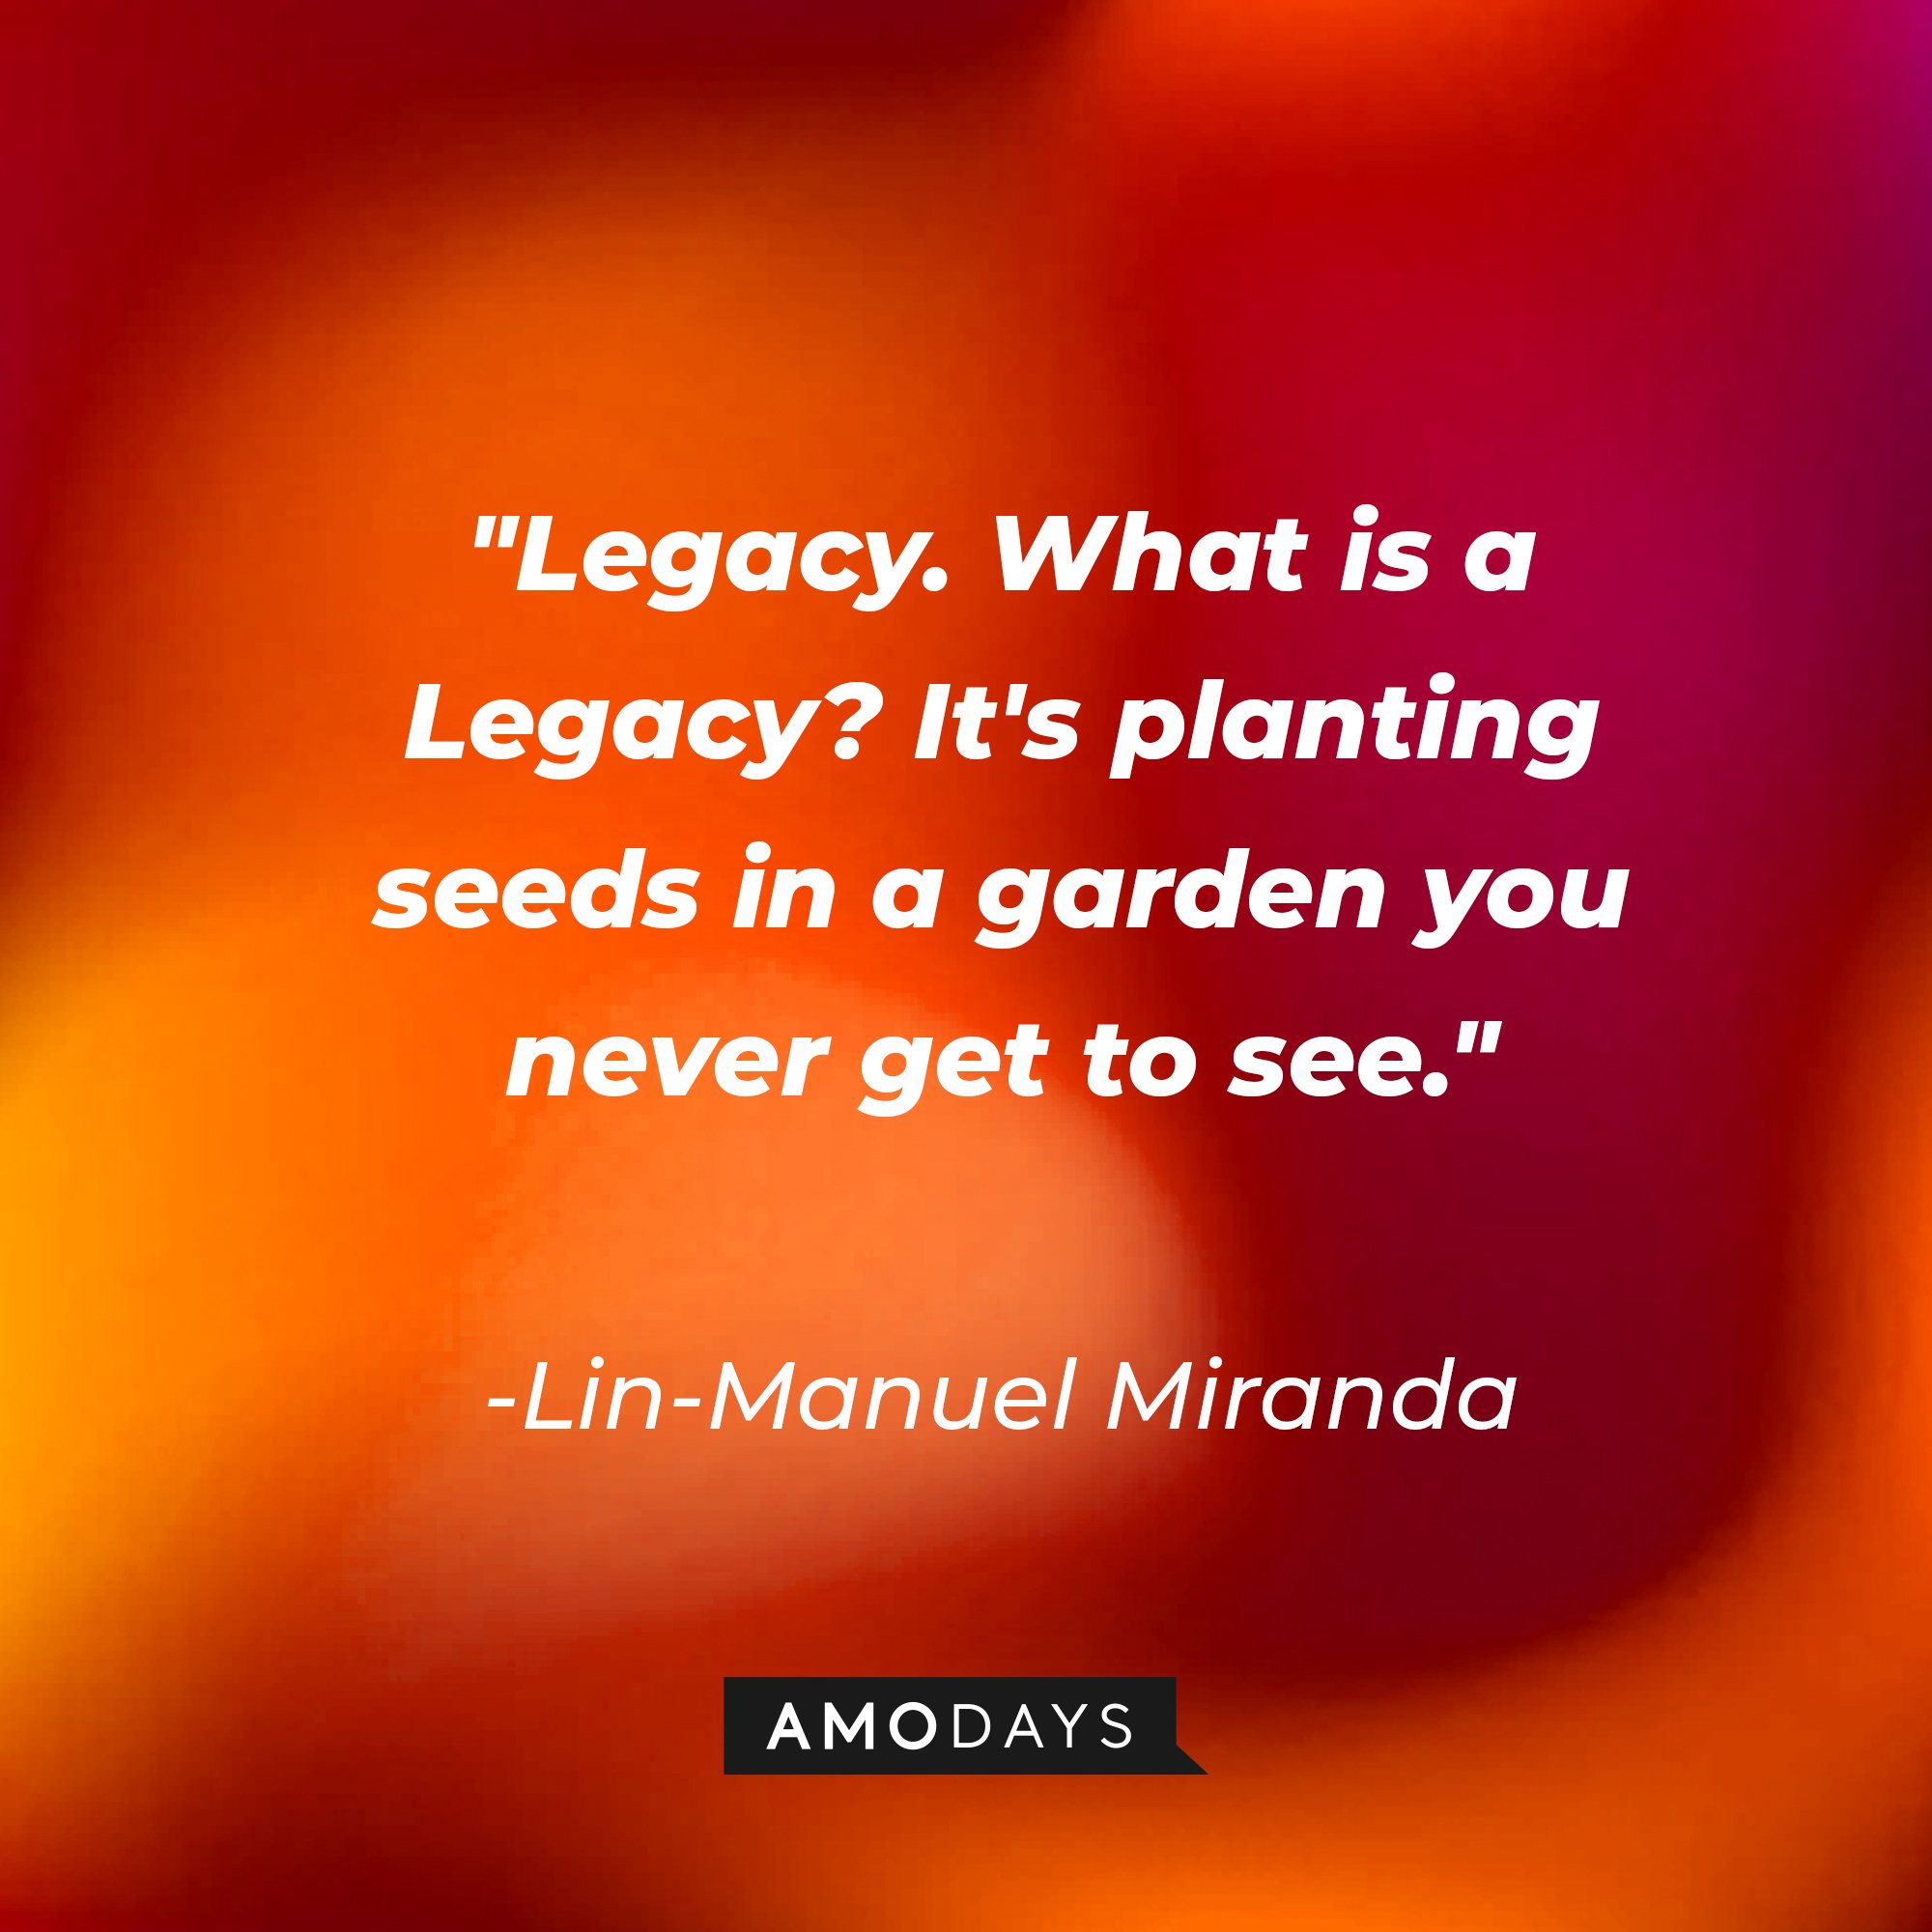 Lin-Manuel Miranda's quote: "Legacy. What is a Legacy? It's planting seeds in a garden you never get to see." | Image: AmoDays